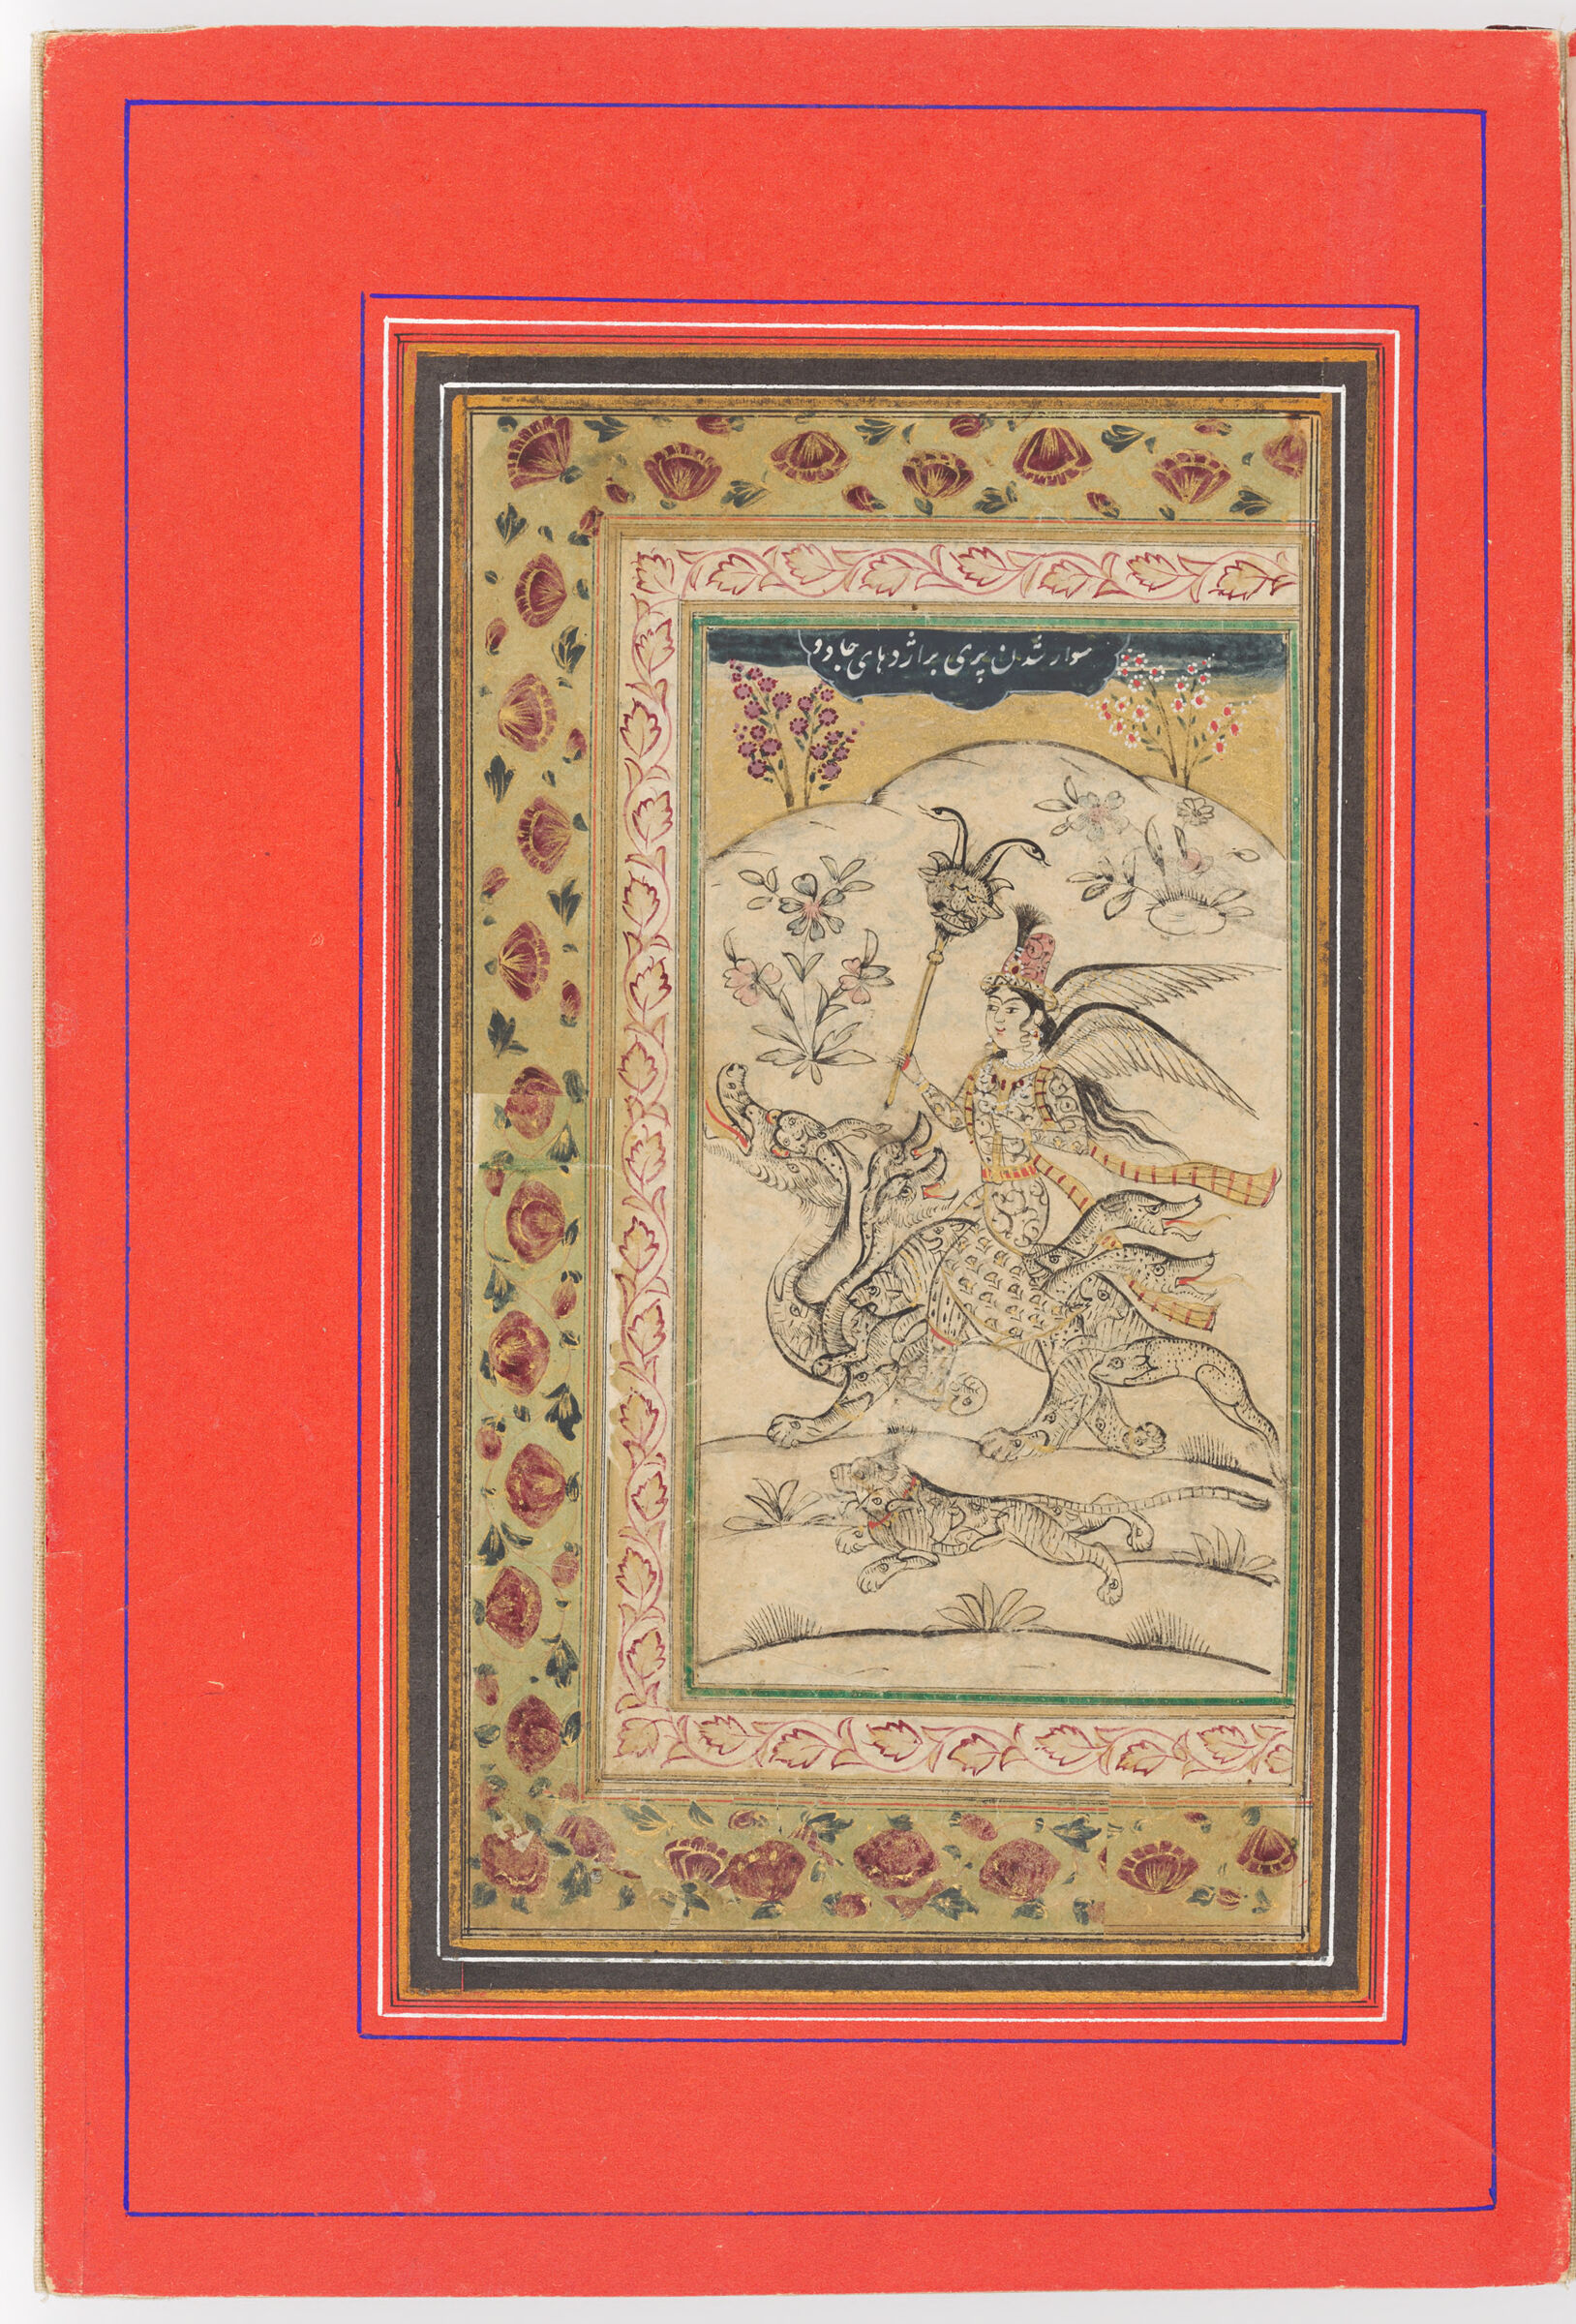 “A Fairy Riding A Magical Dragon (Painting Recto Of Folio 3) And “Mahpari (Moon-Fairy) Riding A Magical Creature (Painting Verso Of Folio 3), Illustrated Folio From An Album Of Illustrations Of Hamzanama”